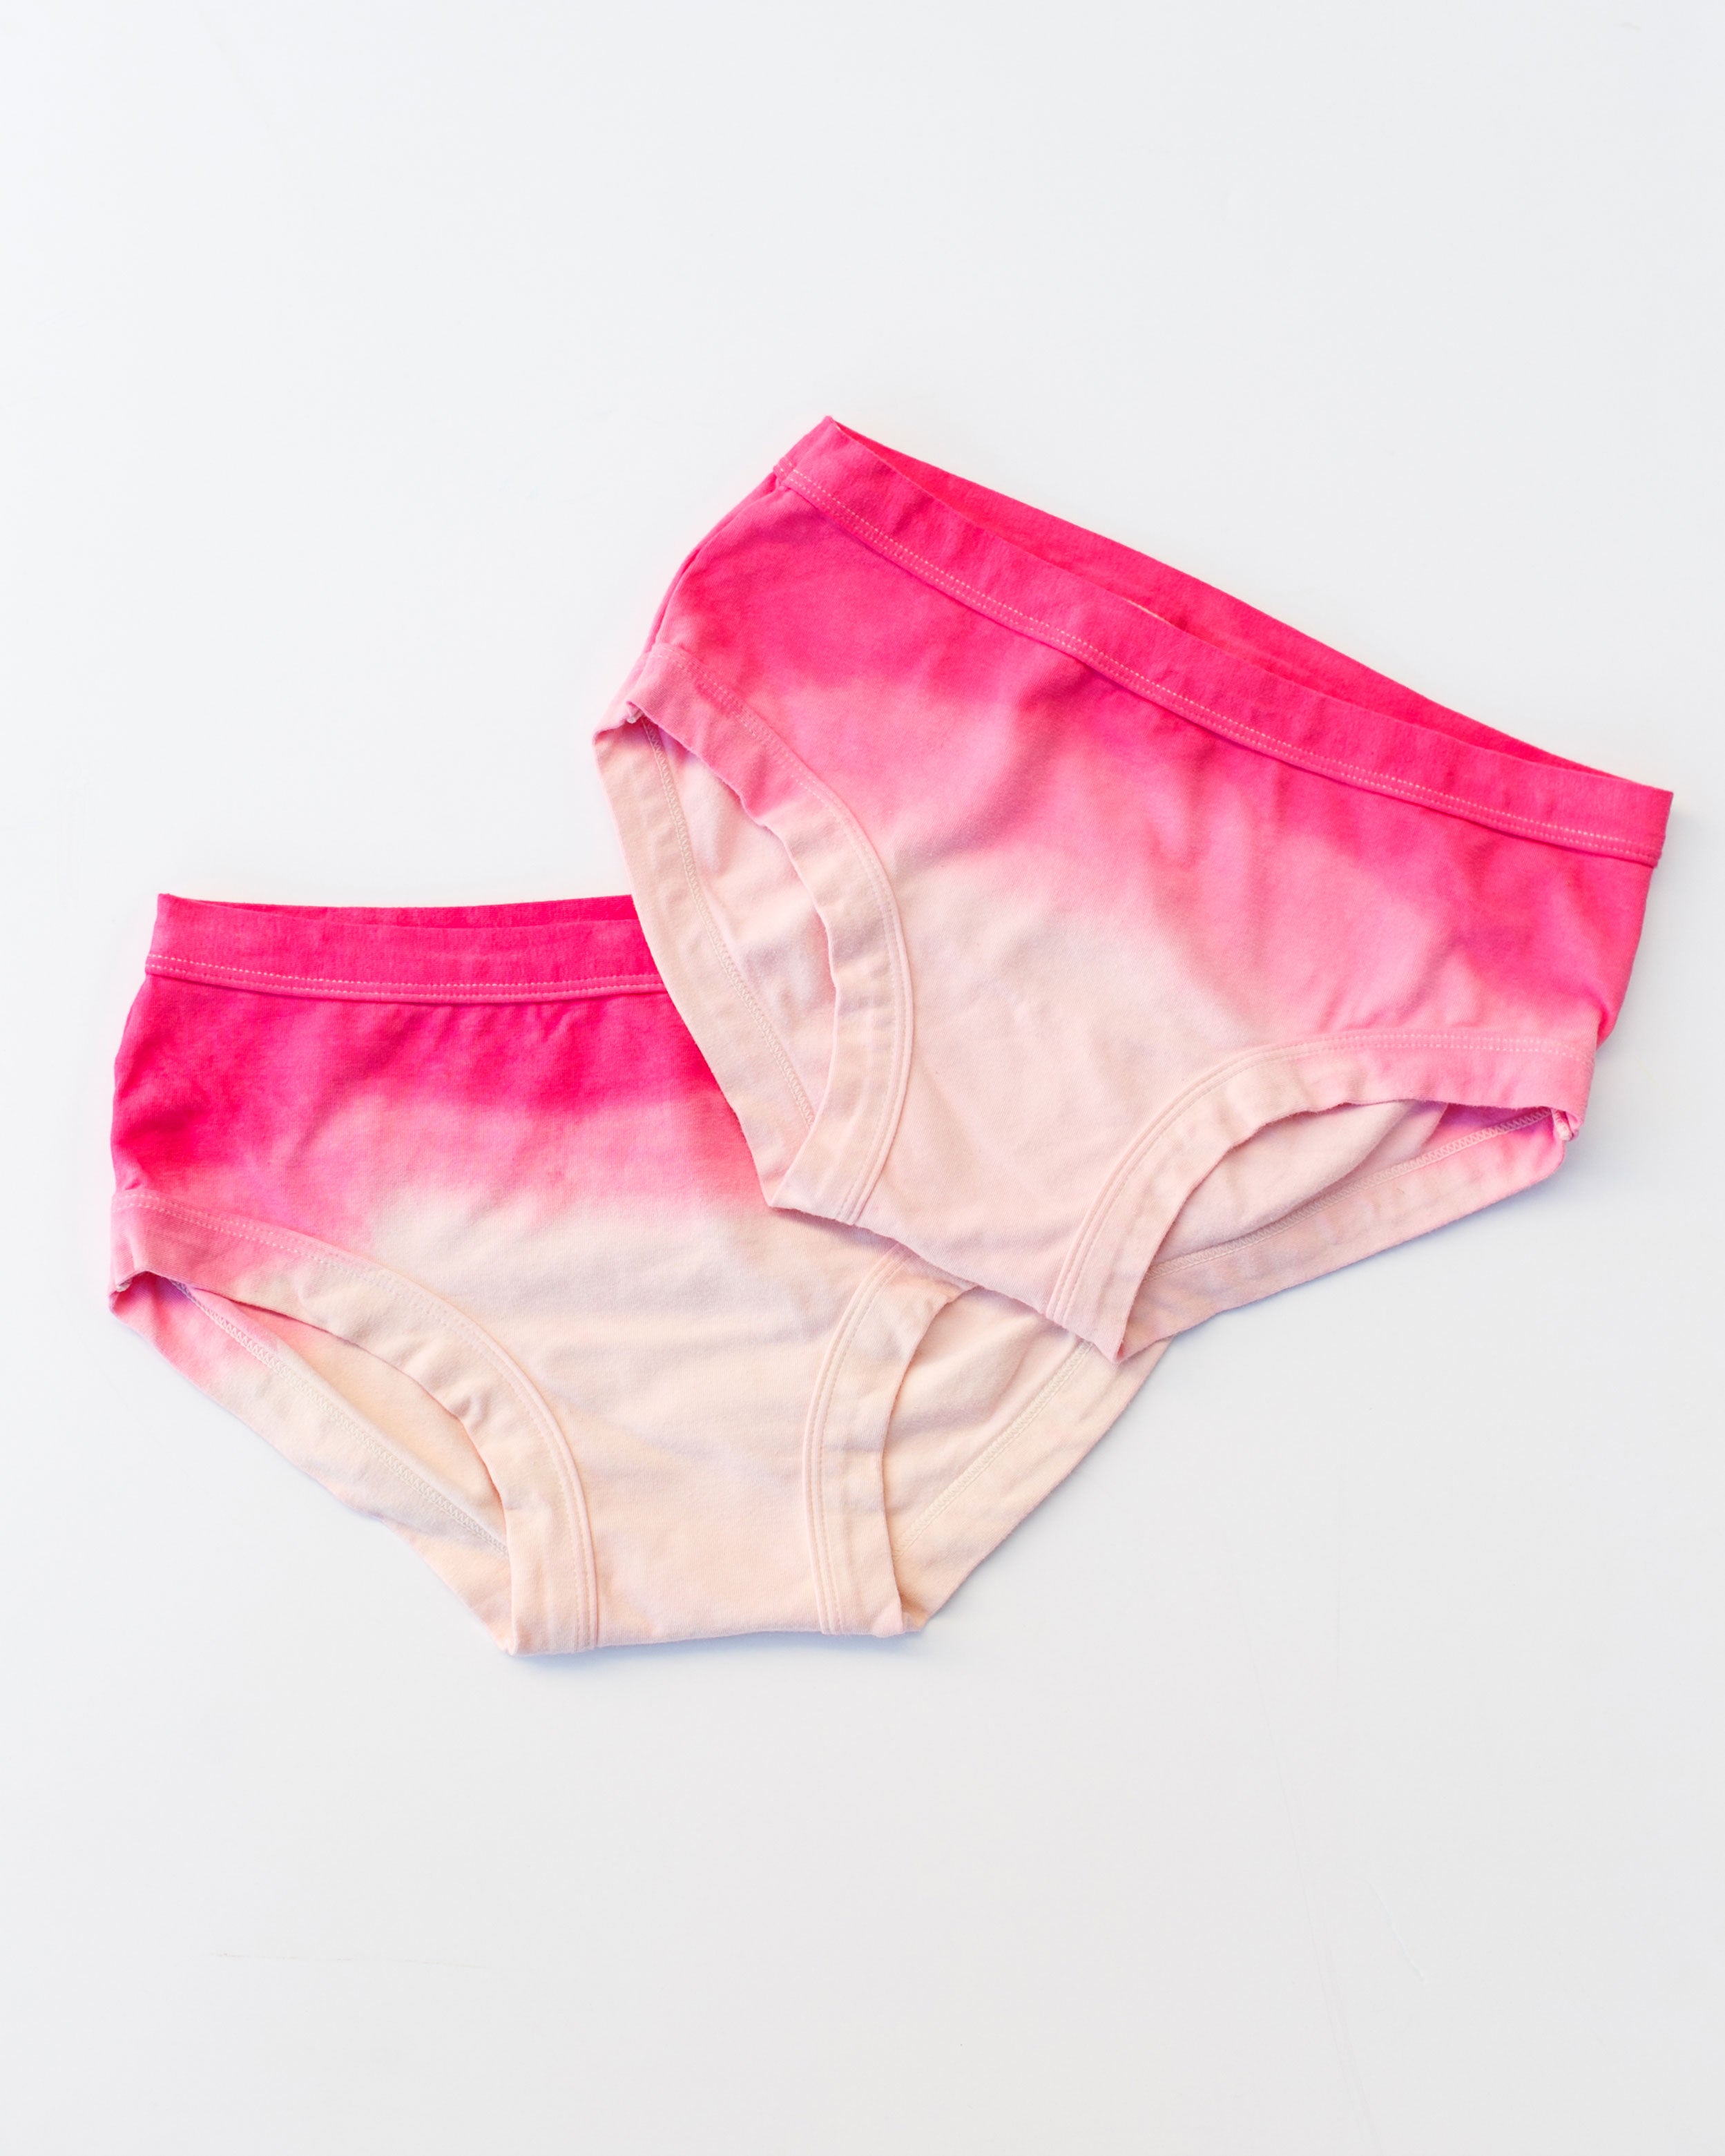 Flat lay of Thunderpants organic cotton Hipster underwear in Valentine's Day Dip Dye ombre pinks.